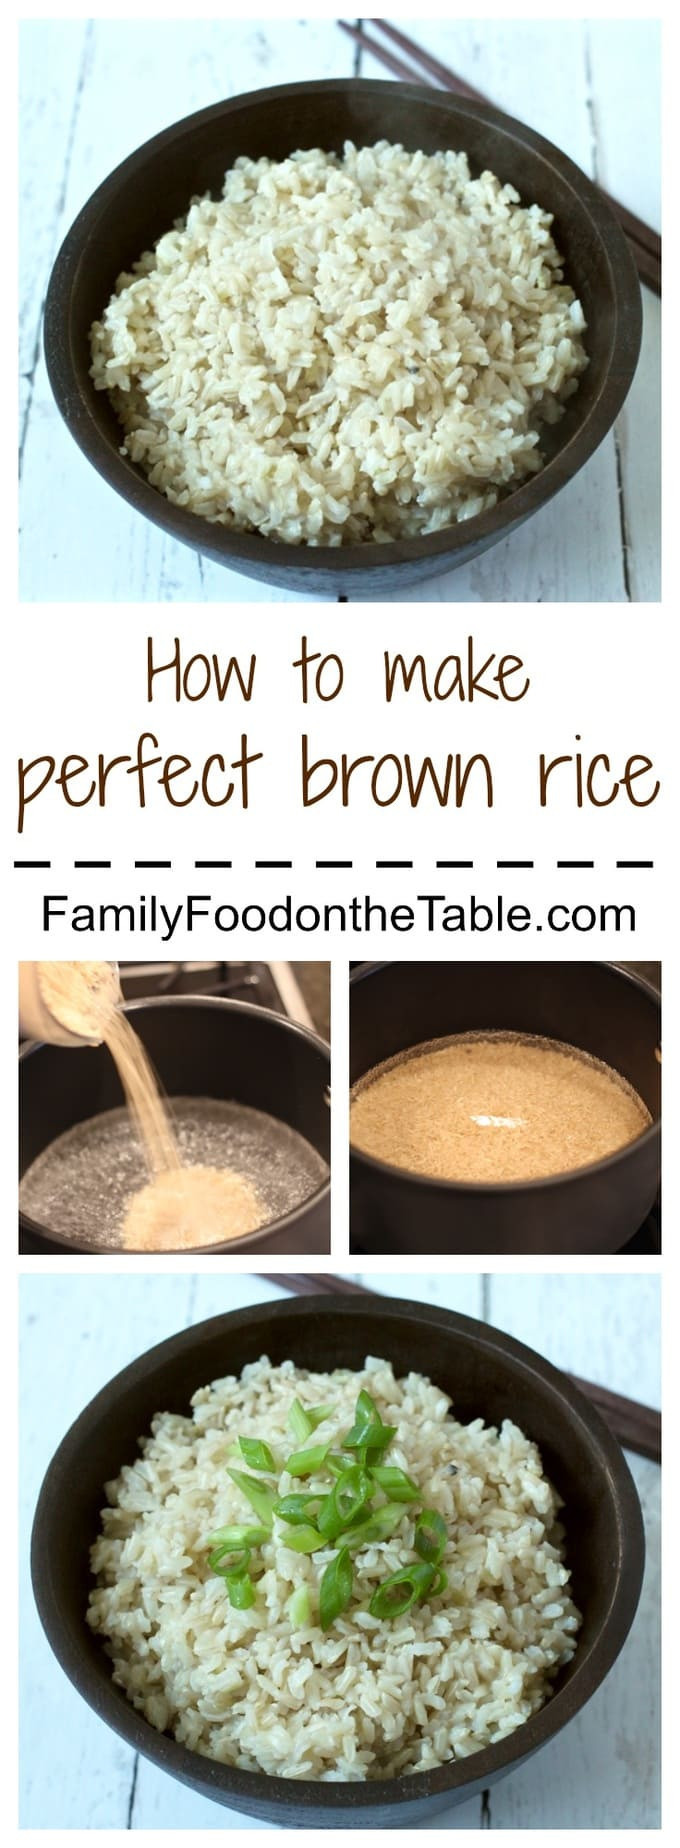 Fiber In Brown Rice
 Perfect brown rice Family Food on the Table